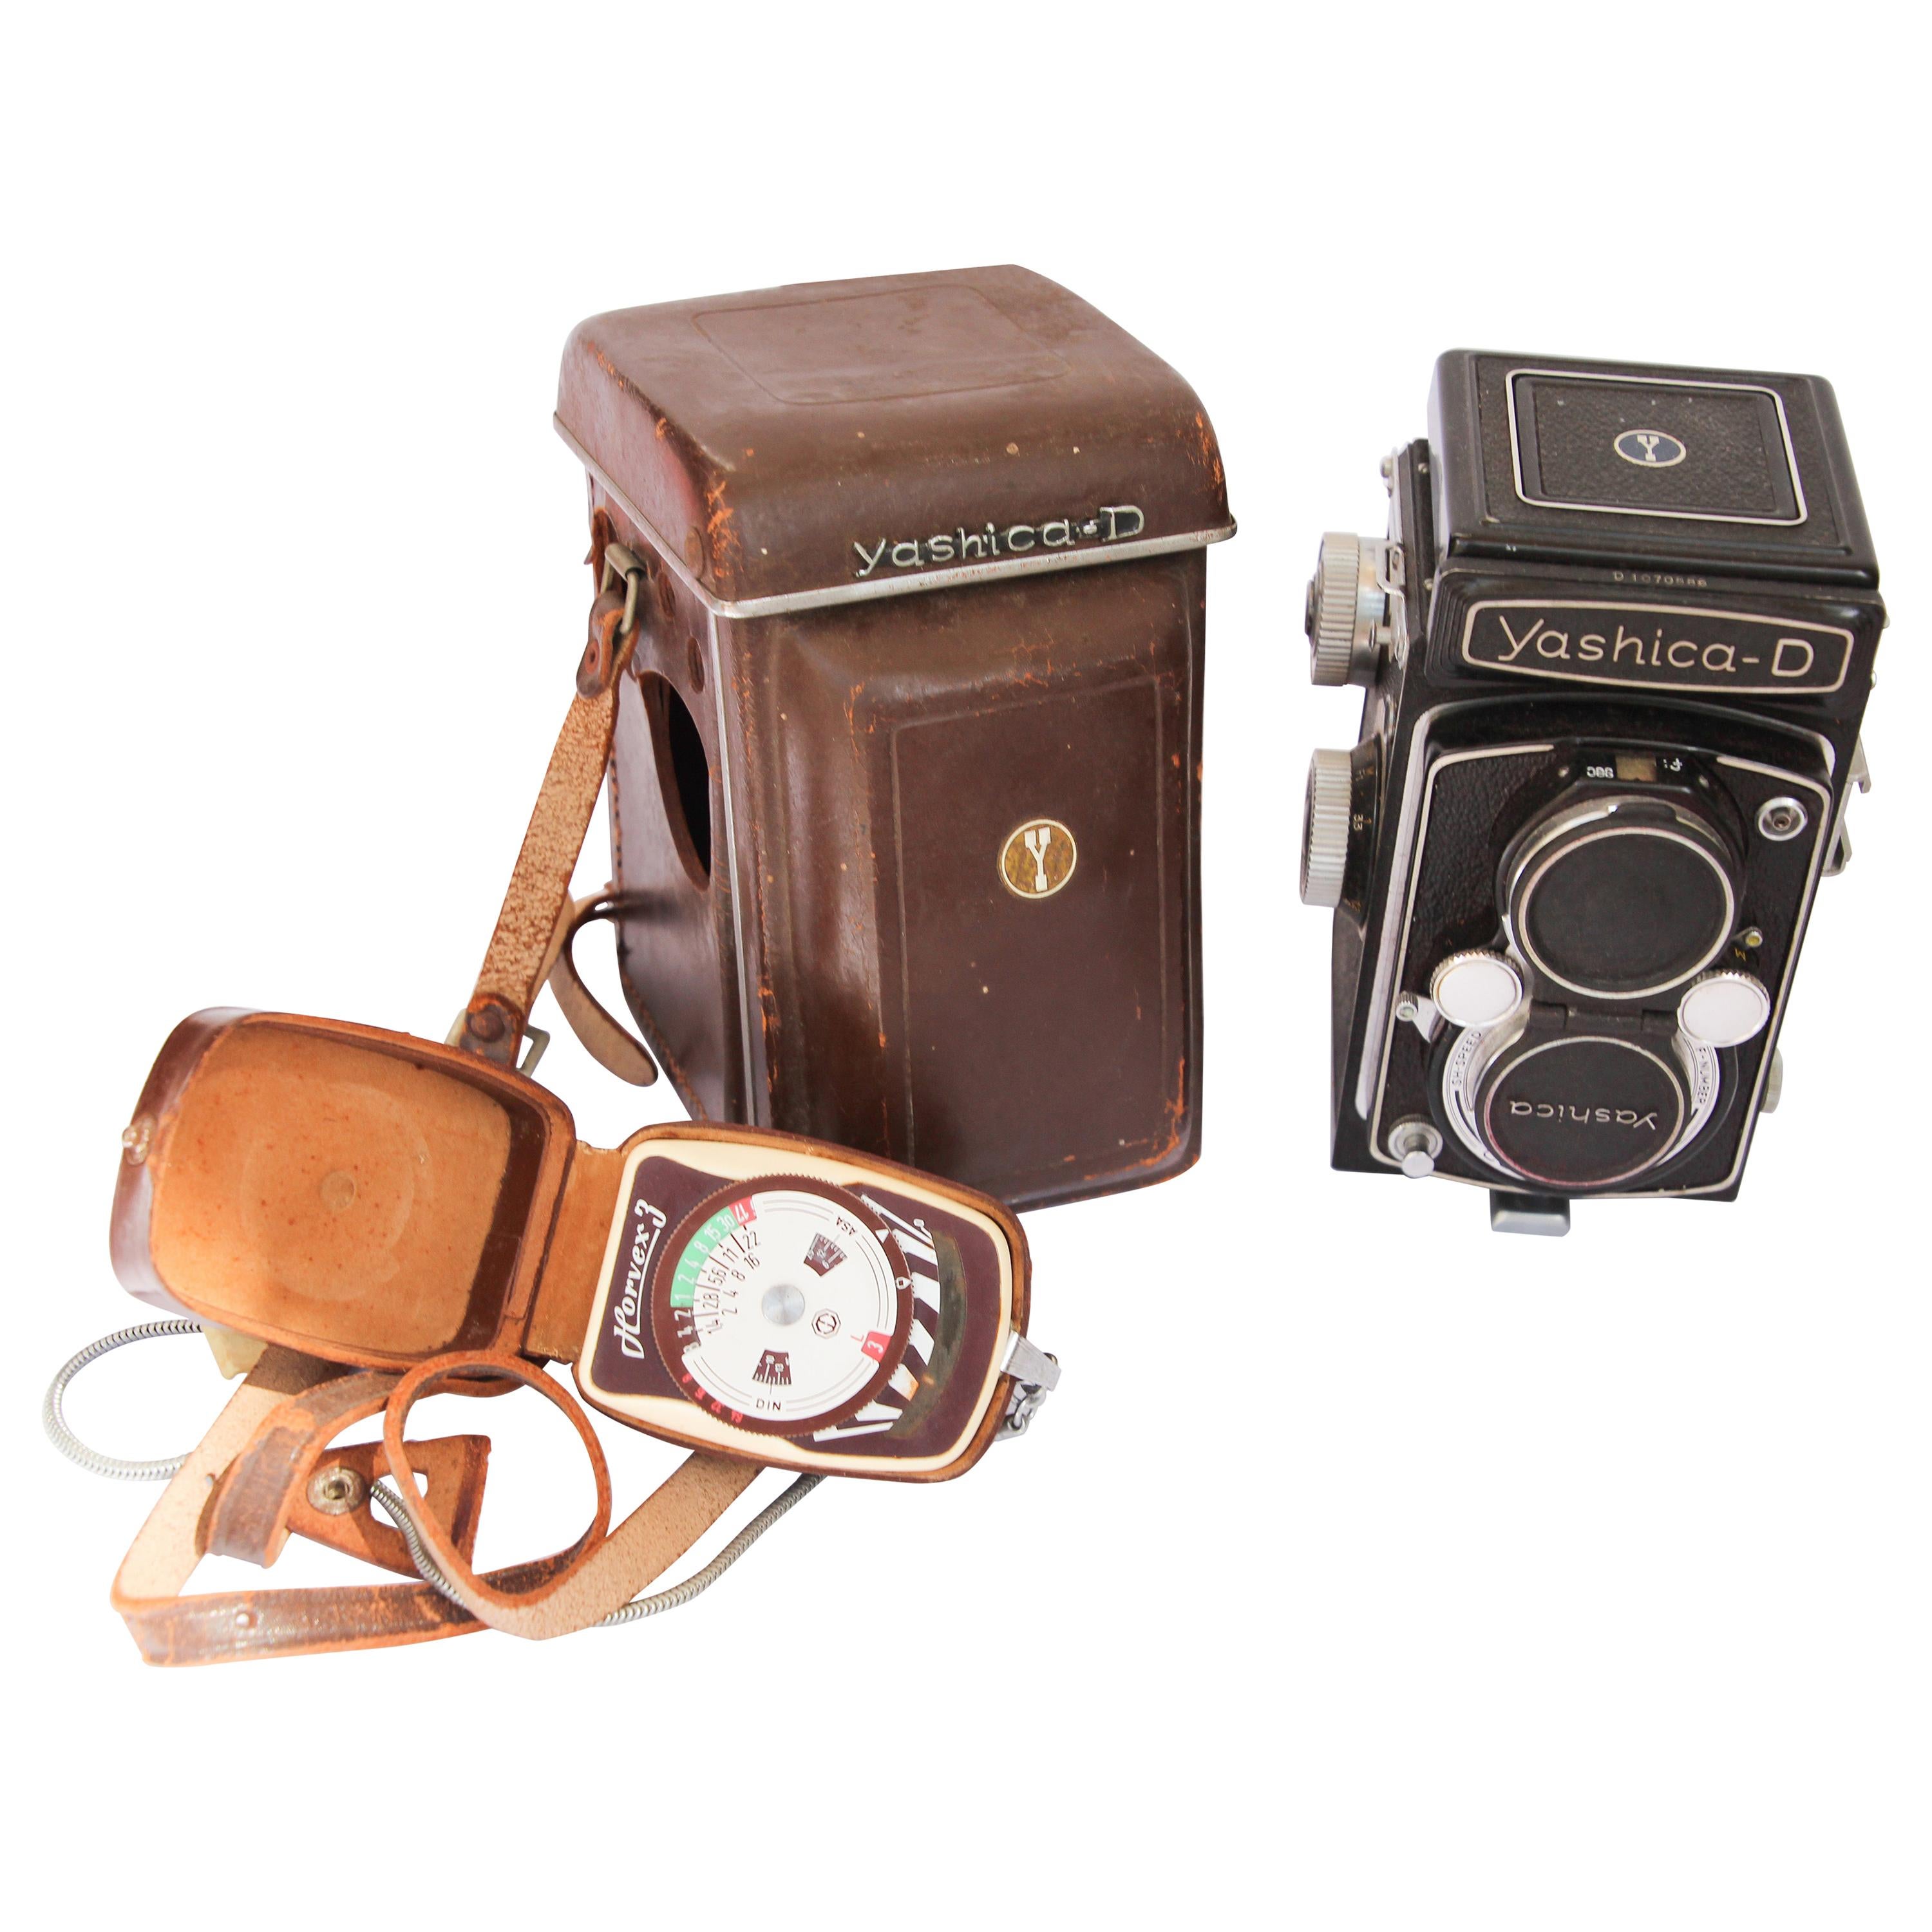 Yashica-D Camera with Case and Accessories, circa 1958 at 1stDibs